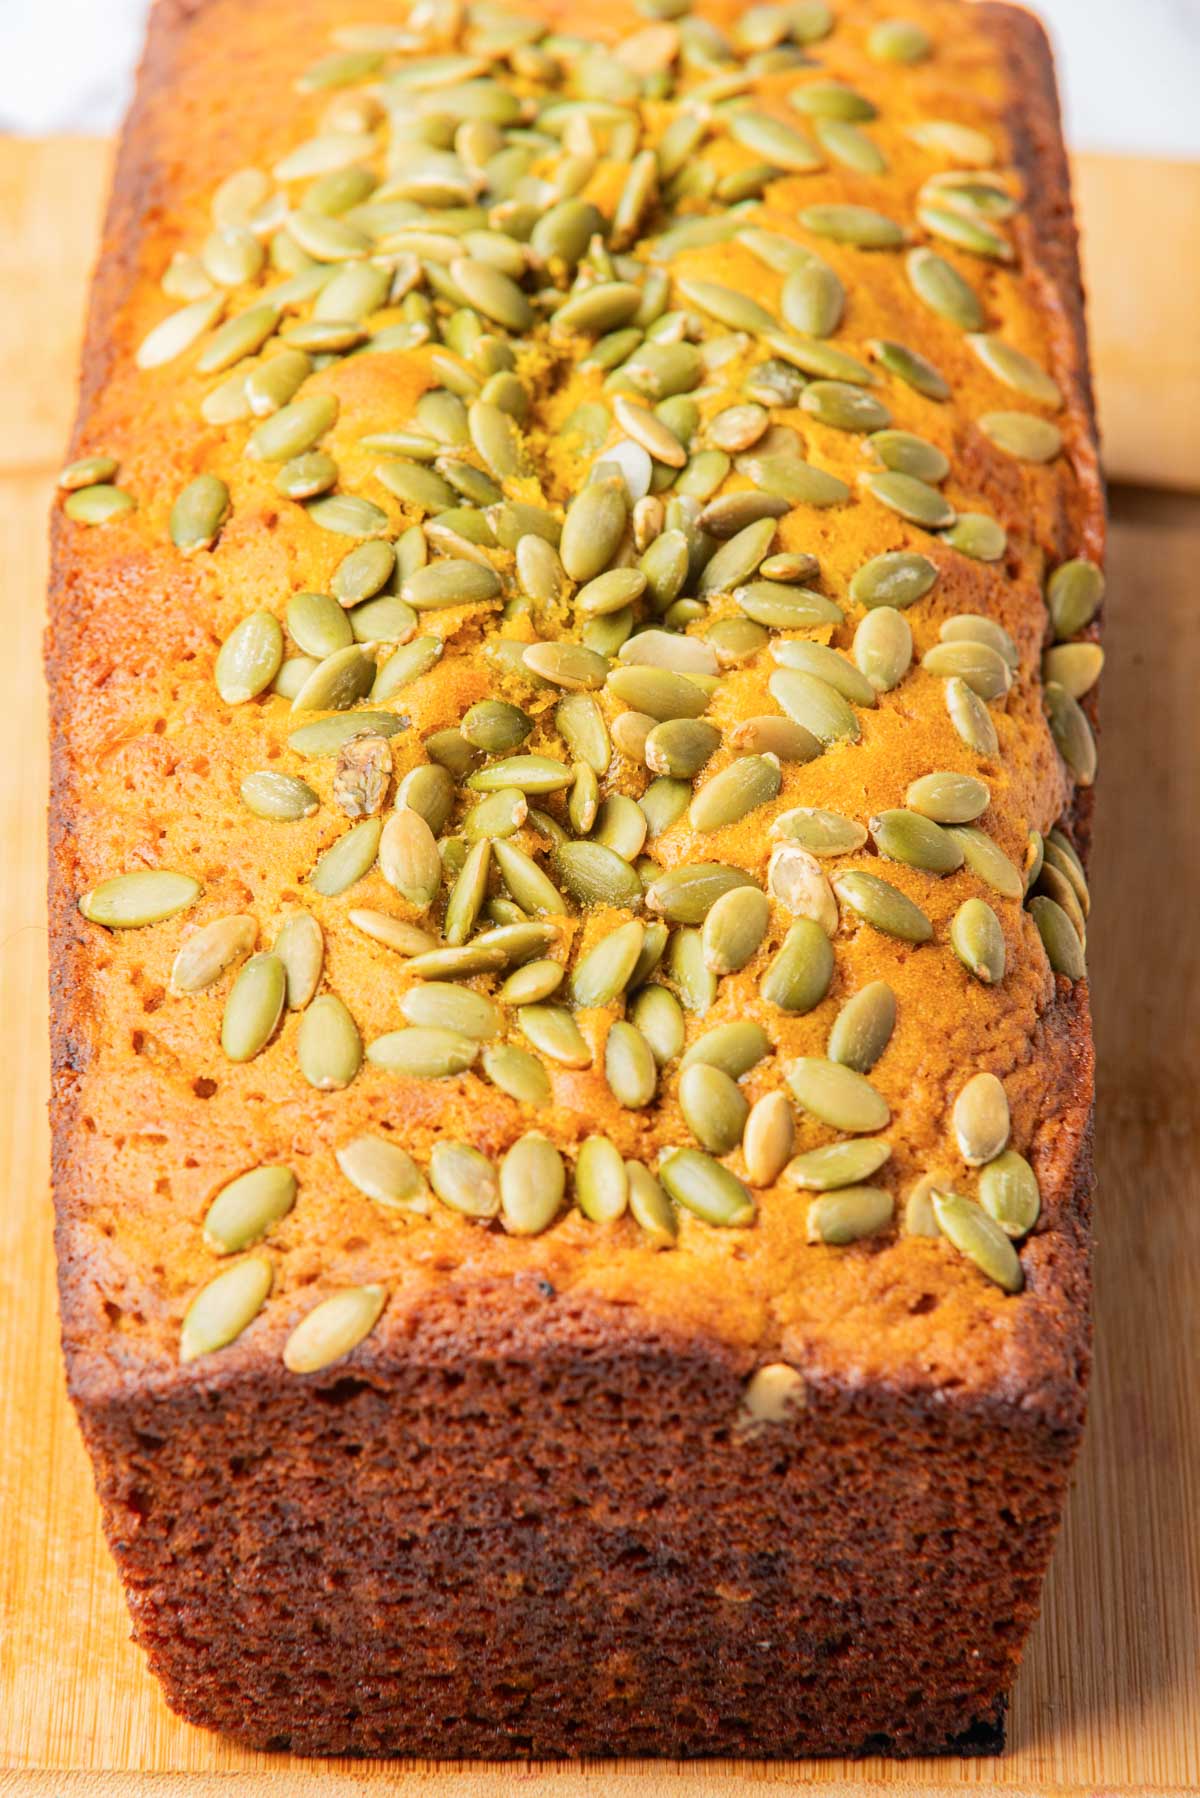 A top-down view of a loaf of pumpkin bread, showcasing the pumpkin seeds topping and golden-brown crust.